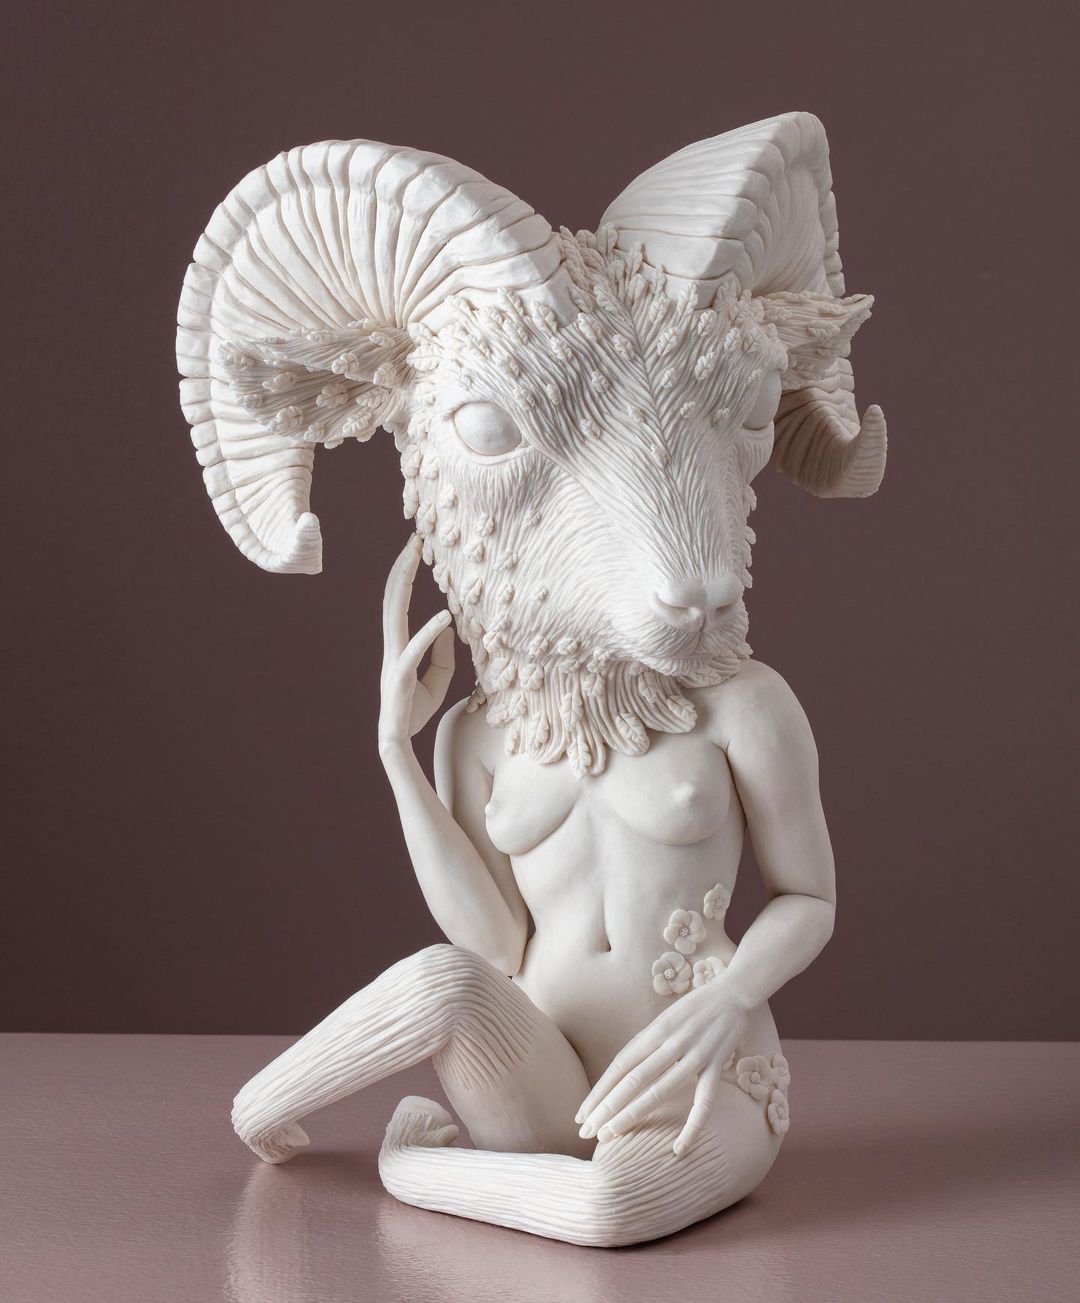 Fabulous Sculptures Of Human Animal Hybrids By Crystal Morey 15